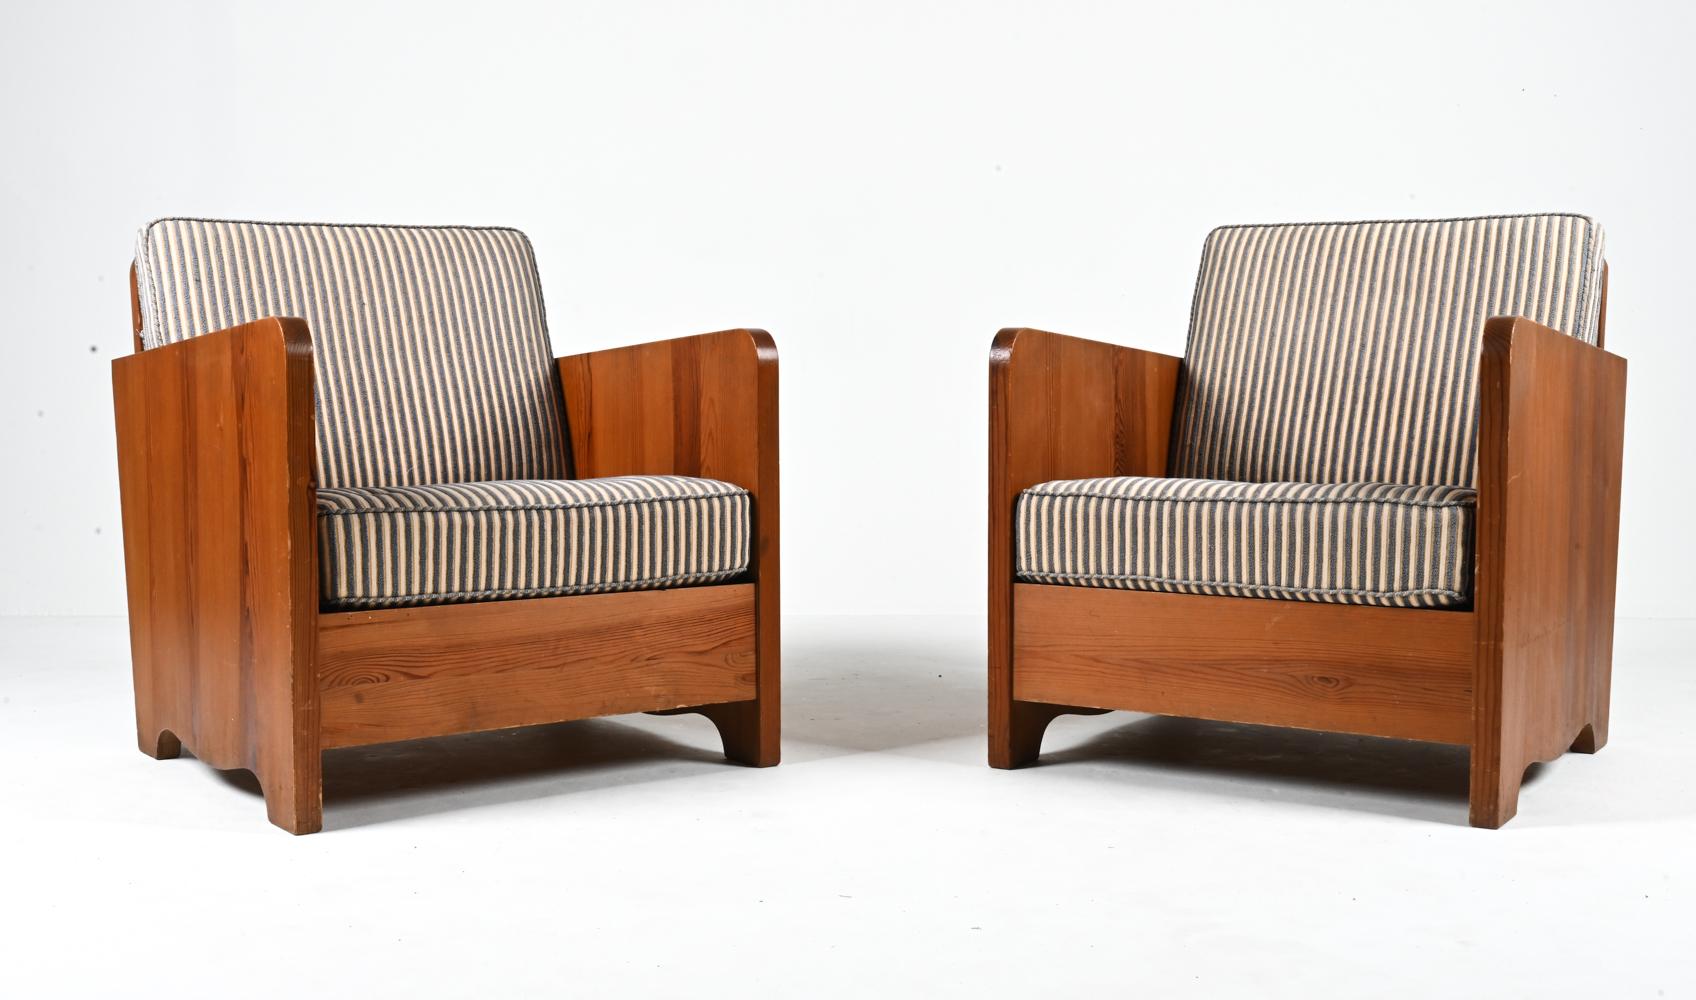 Add an utterly unique dose of rustic charm with this exceptional pair of Early Modern armchairs attributed to Axel Einar Hjorth. Luxuriate in the rich natural texture of the solid pine frames while the thick sprung cushions provide an ergonomic and